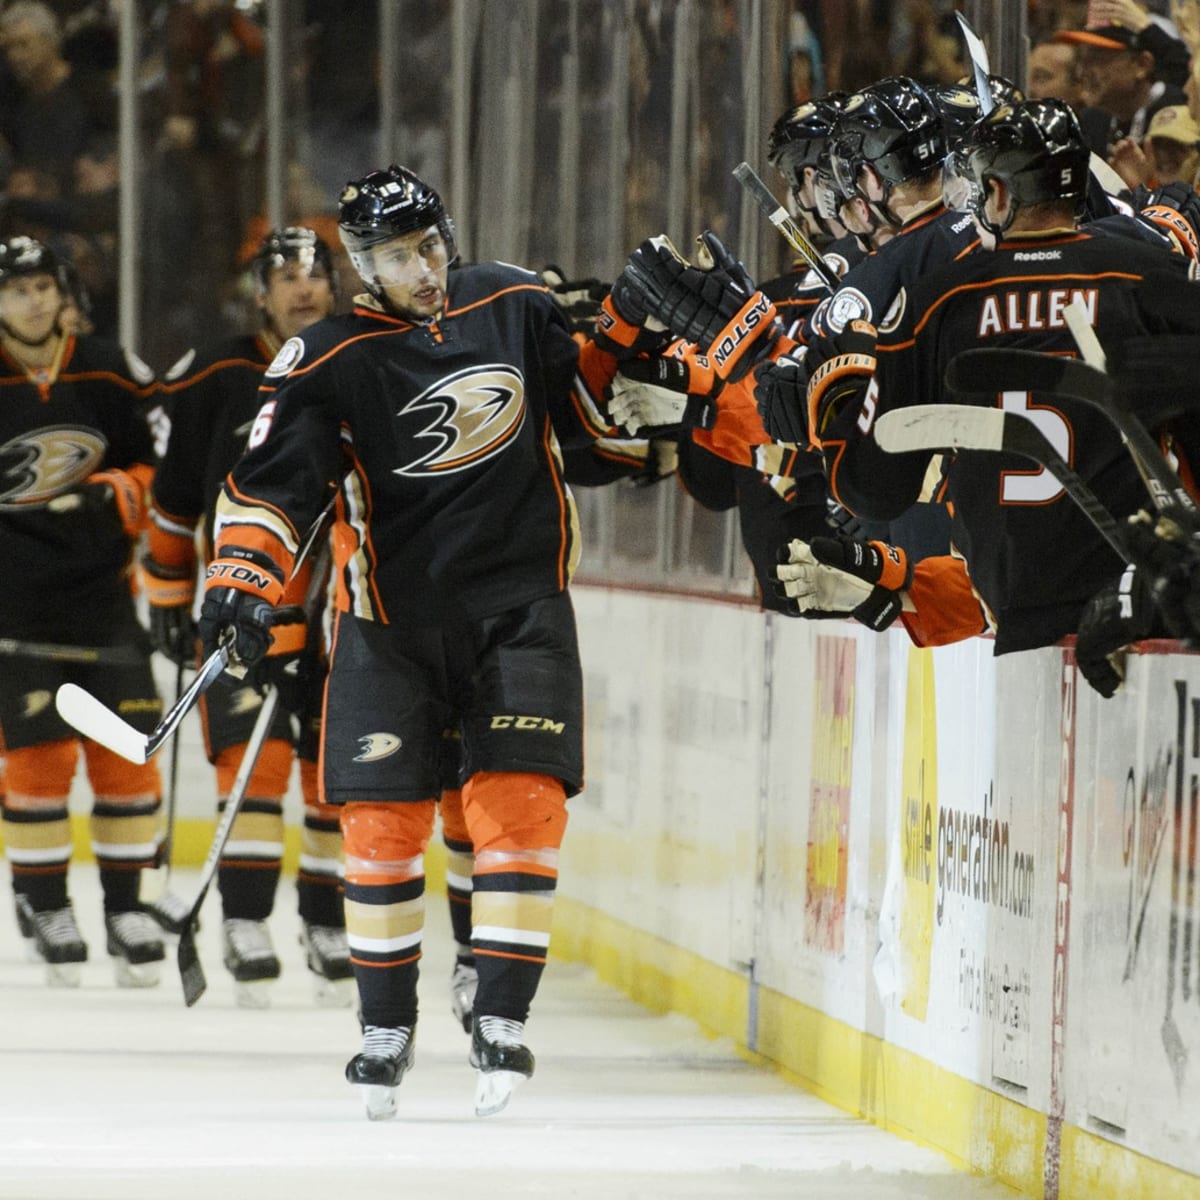 ANAHEIM DUCKS EXTEND AFFILIATION AGREEMENT WITH TULSA OILERS OF